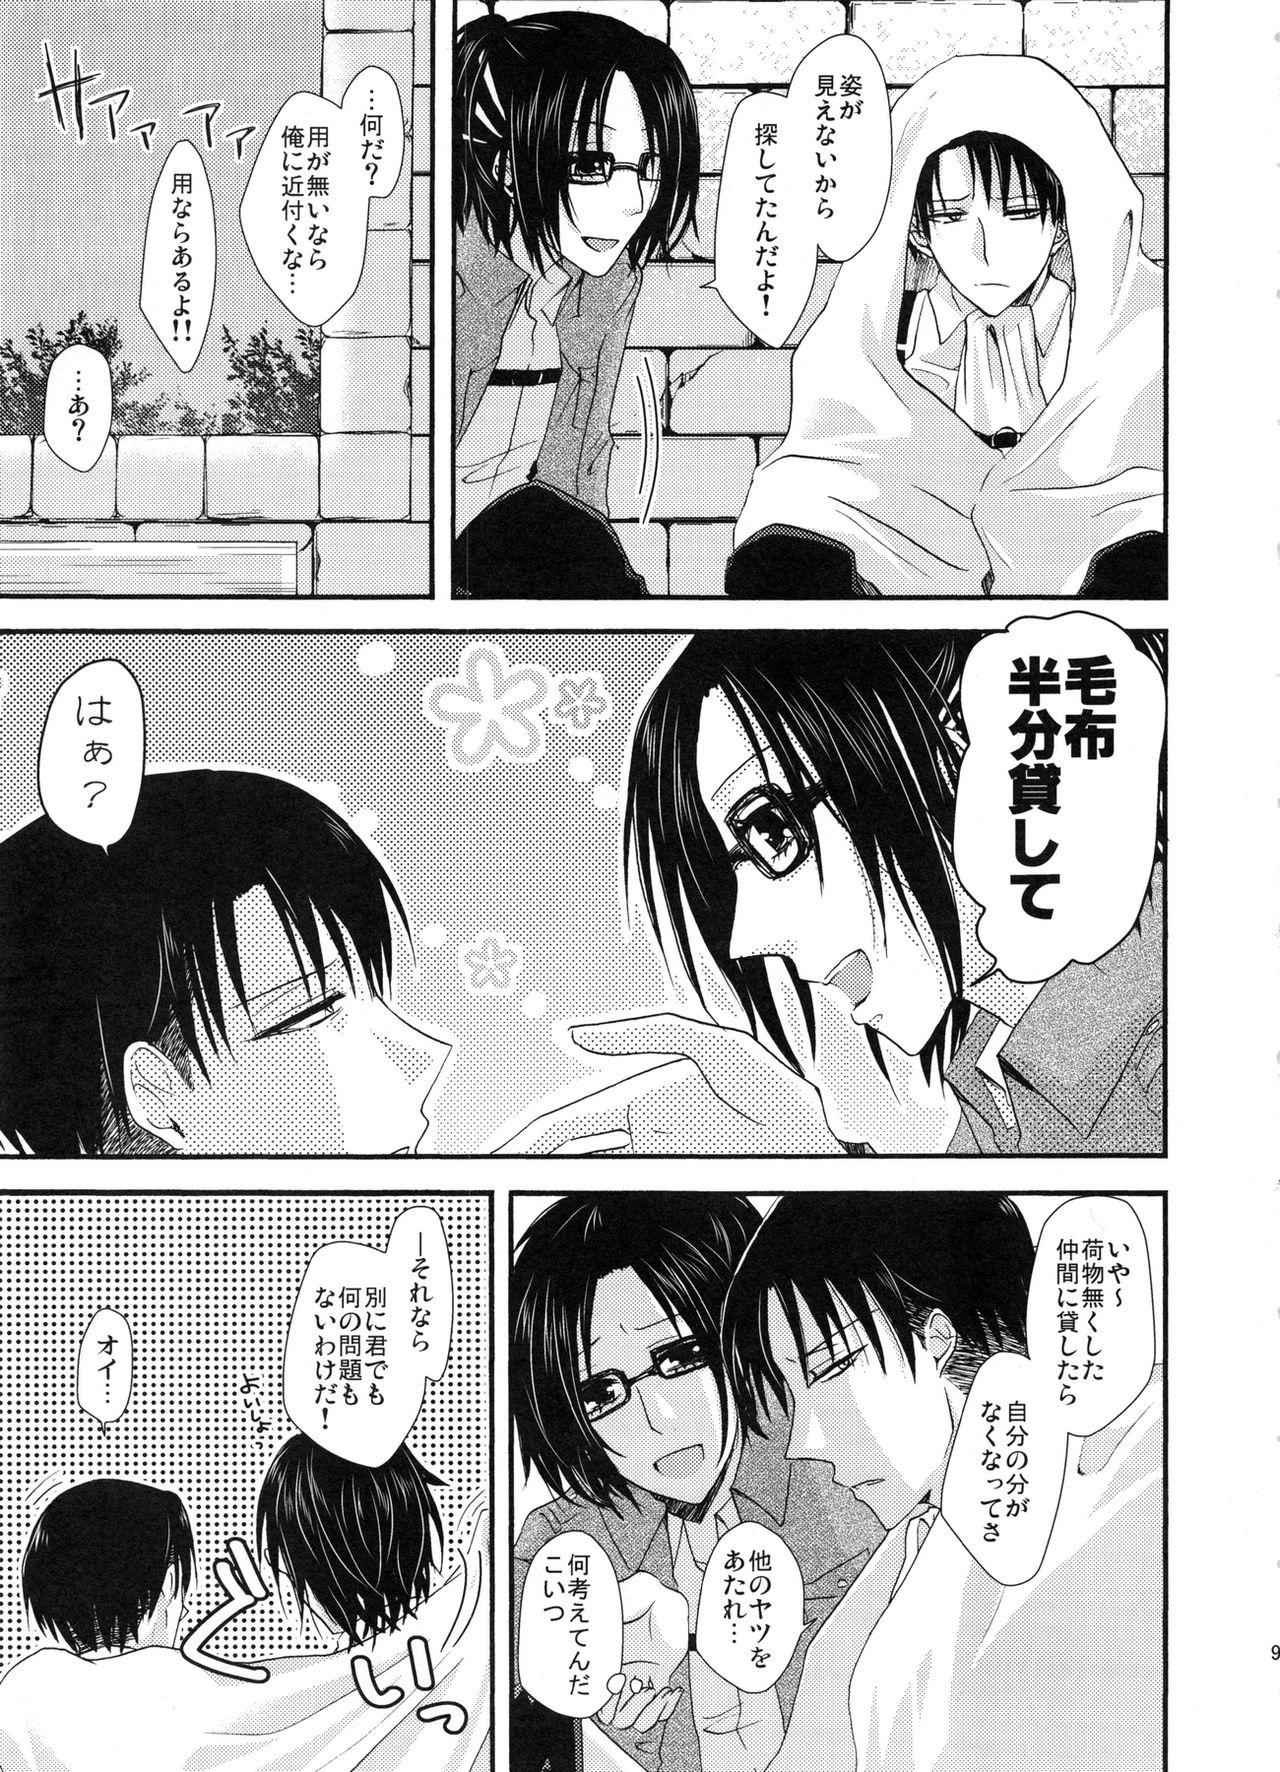 Roughsex Stand By Me - Shingeki no kyojin Model - Page 8